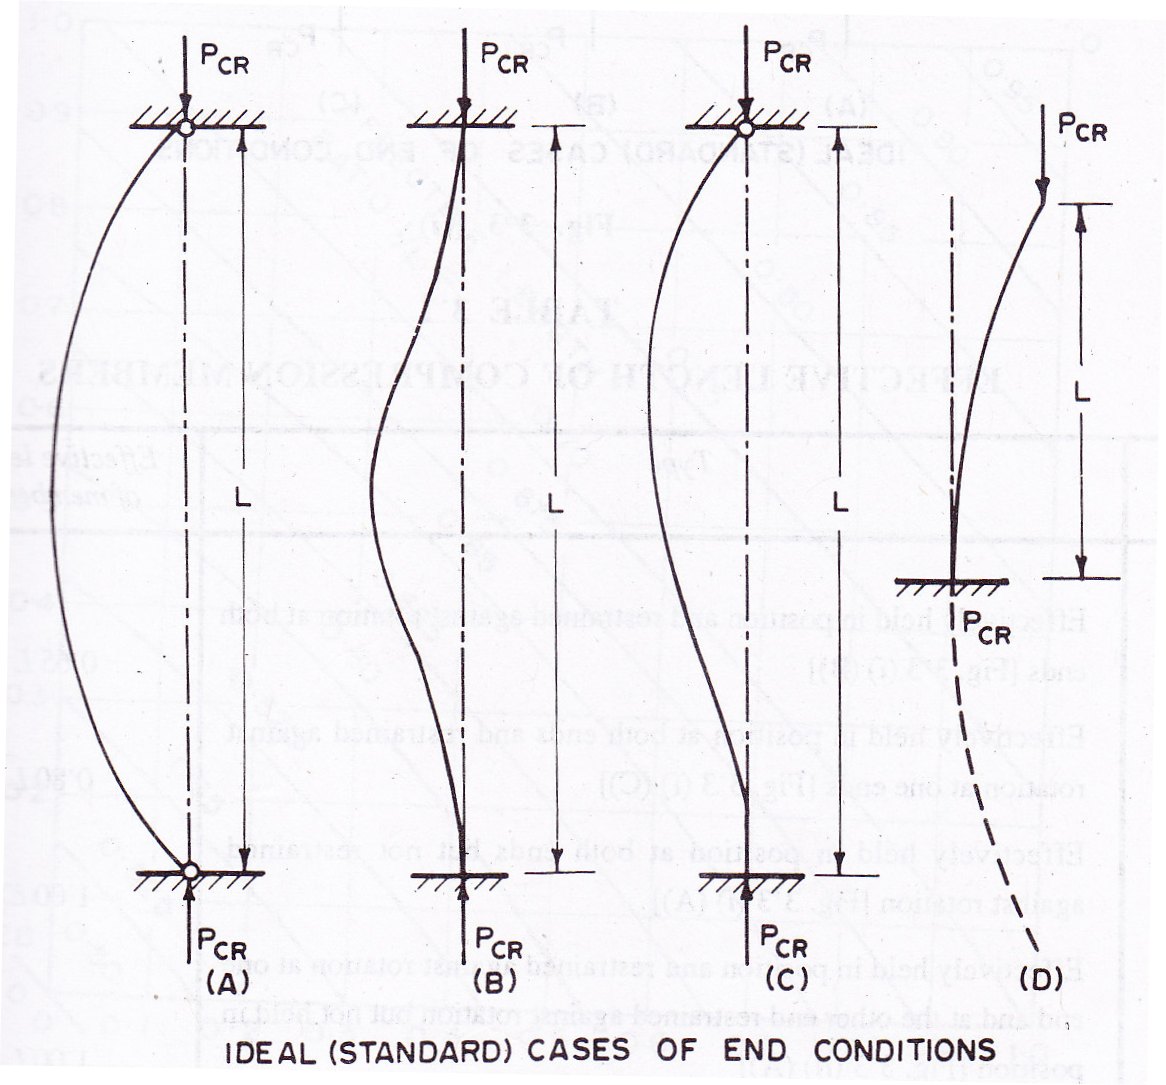 10.3 Ideal cases of end conditions